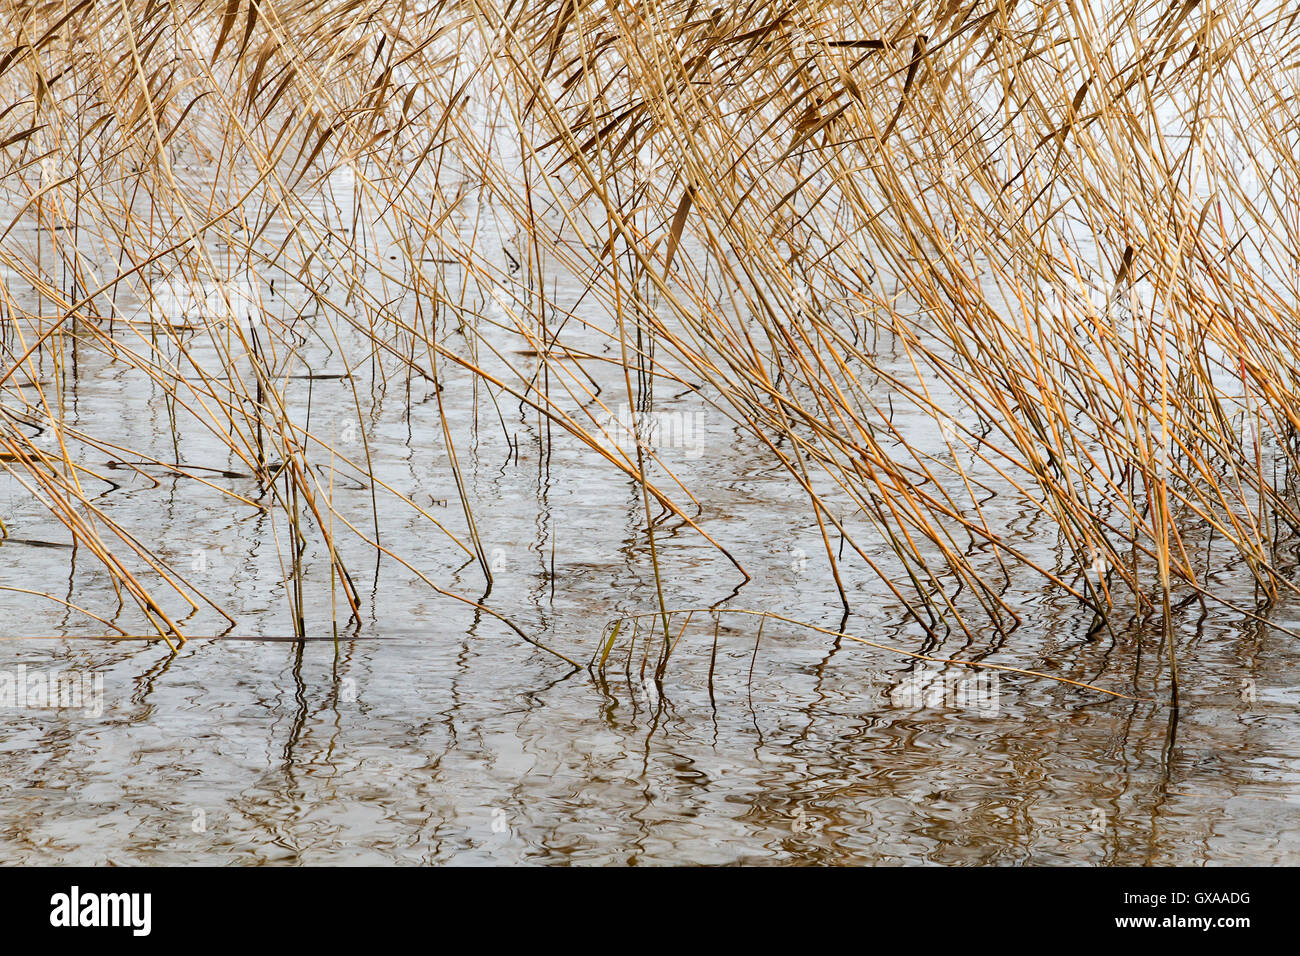 Abstract seasonal autumn background: dry plant / reed / reeds bush forming a geometric pattern along with reflections Stock Photo